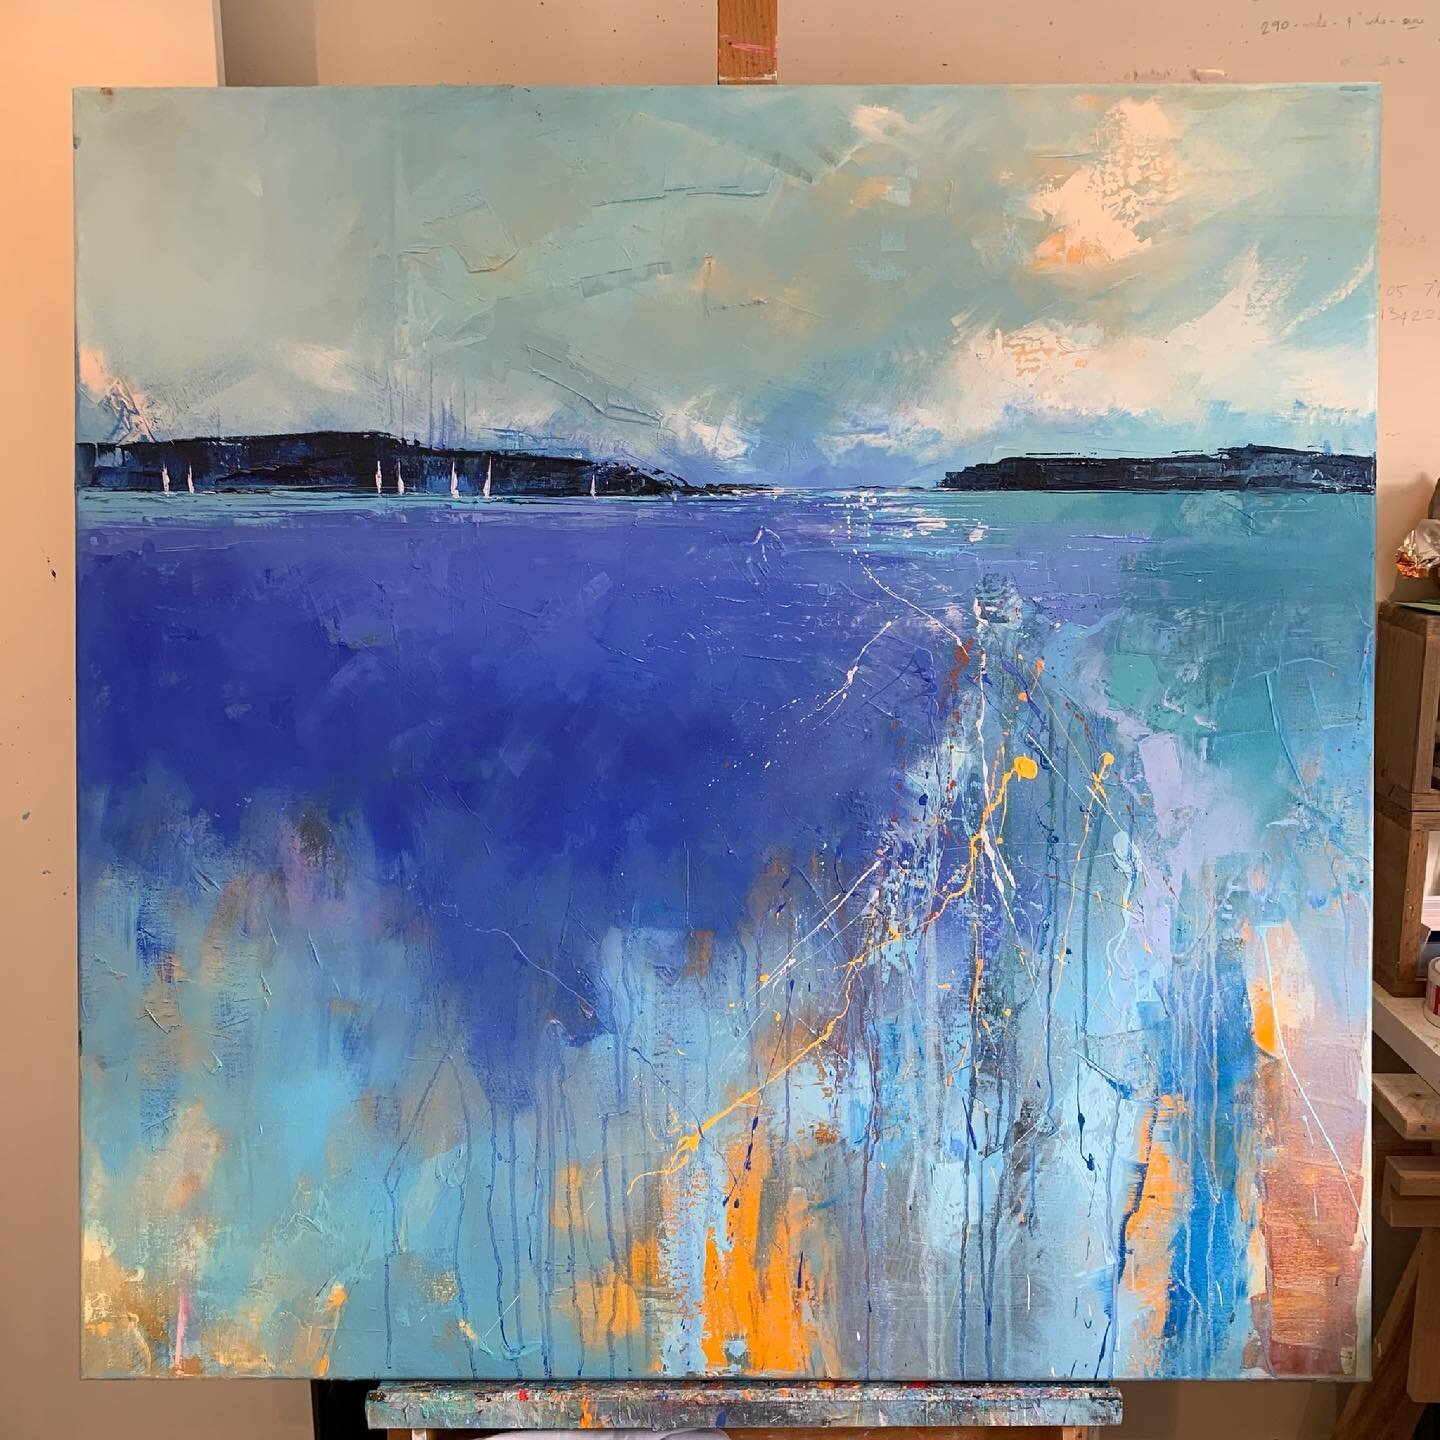 N E W  P A I N T I N G
Pleased to introduce my latest painting for sale with the other recent 2 on my page... this is 40 x 40&rdquo; and is titled &ldquo;A Good Day for a Sail&rdquo; 💙💙💙

#naomcdowellart #cornwall #londonartist #oilpaint #oiloncan